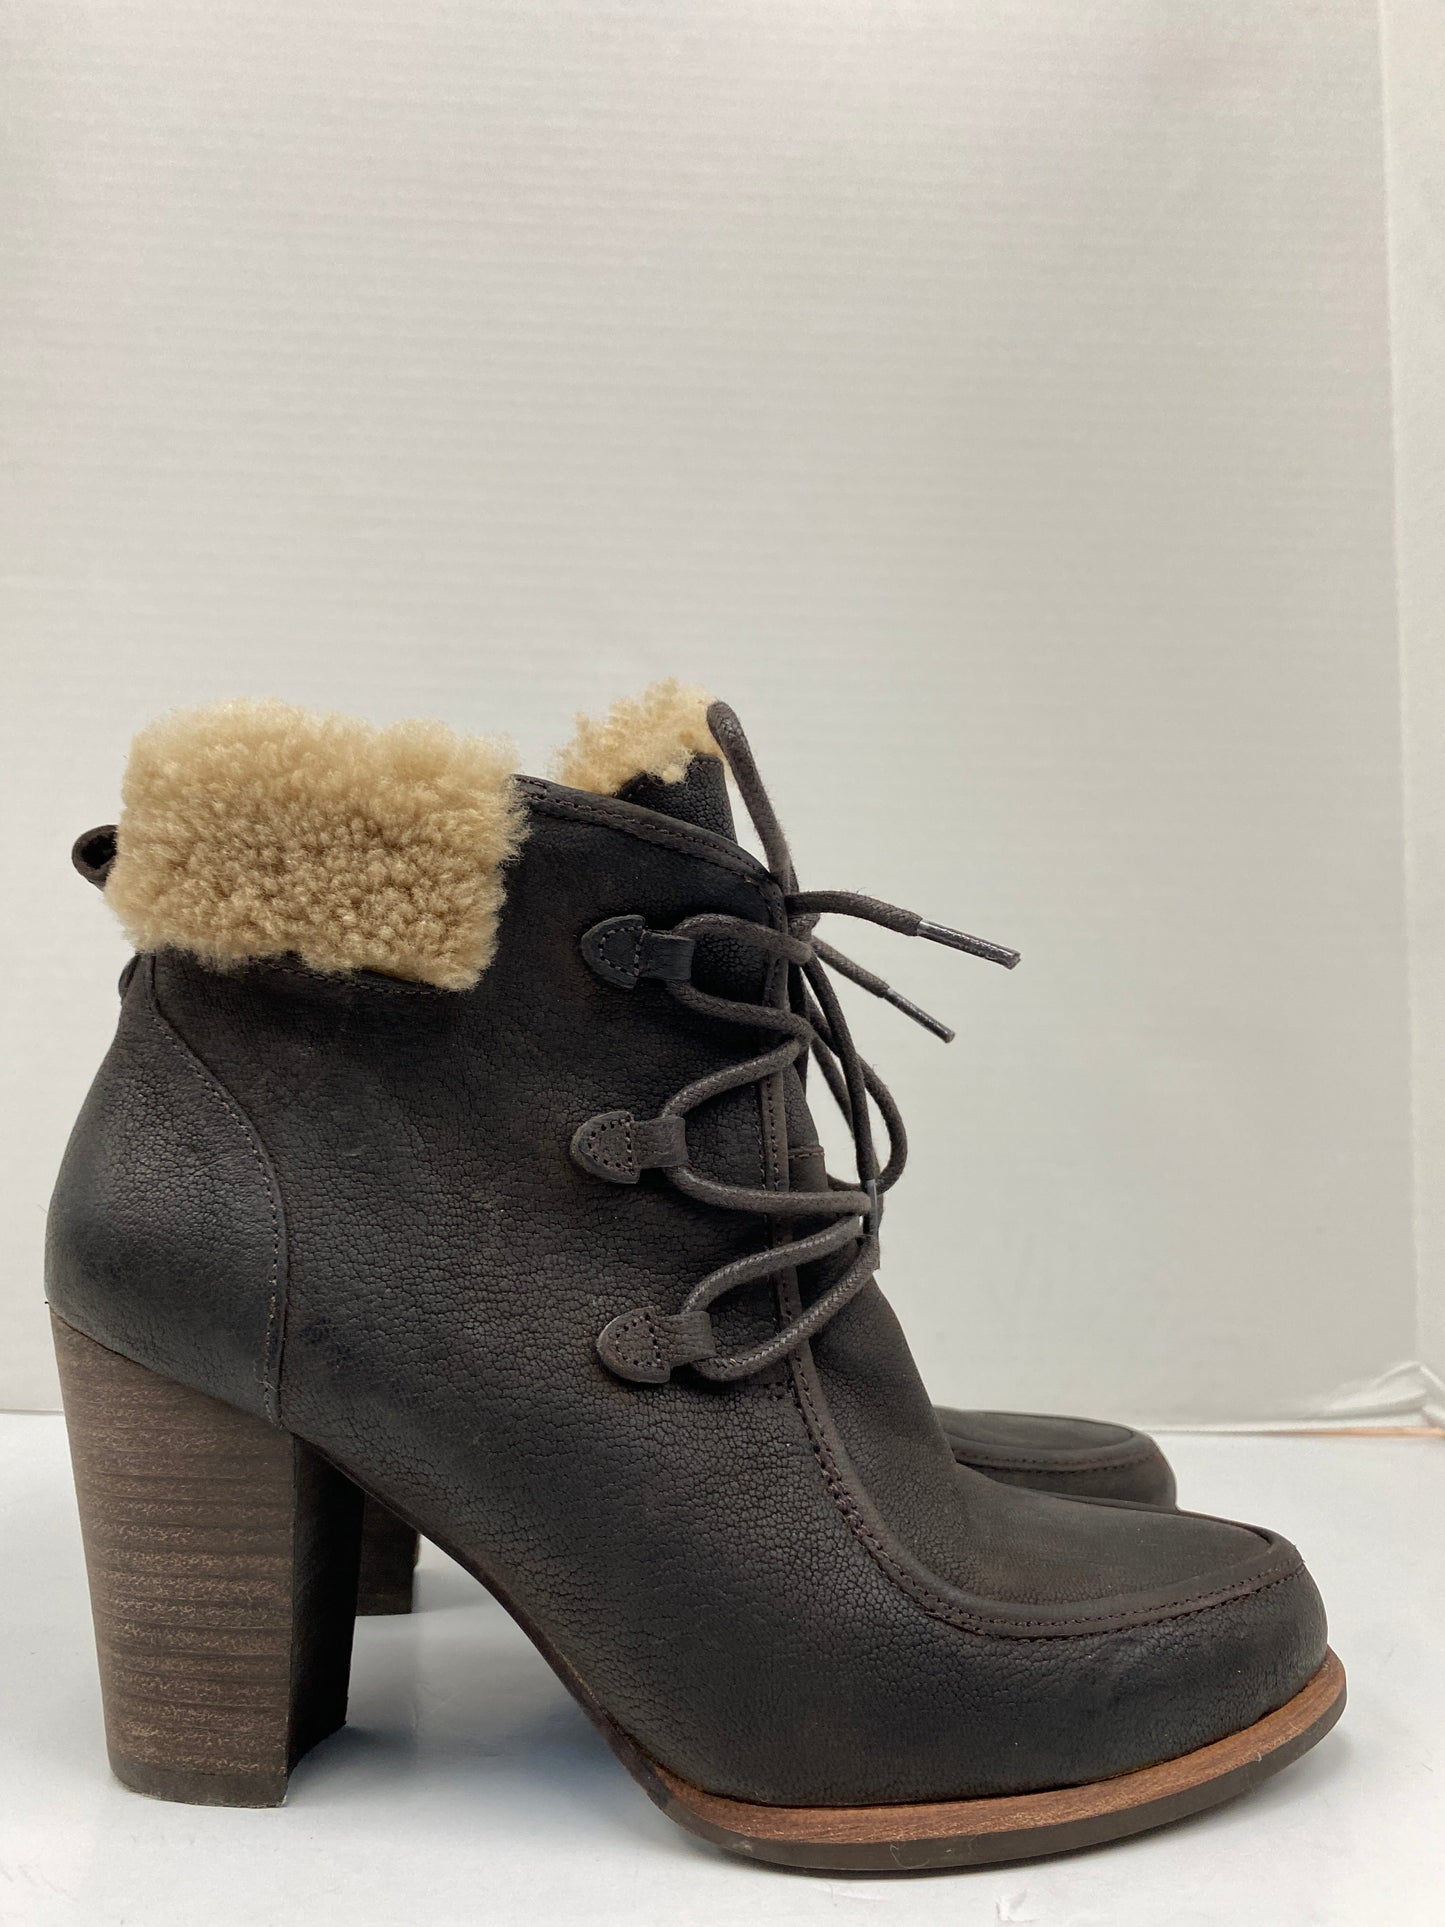 Boots Ankle Heels By Ugg  Size: 8